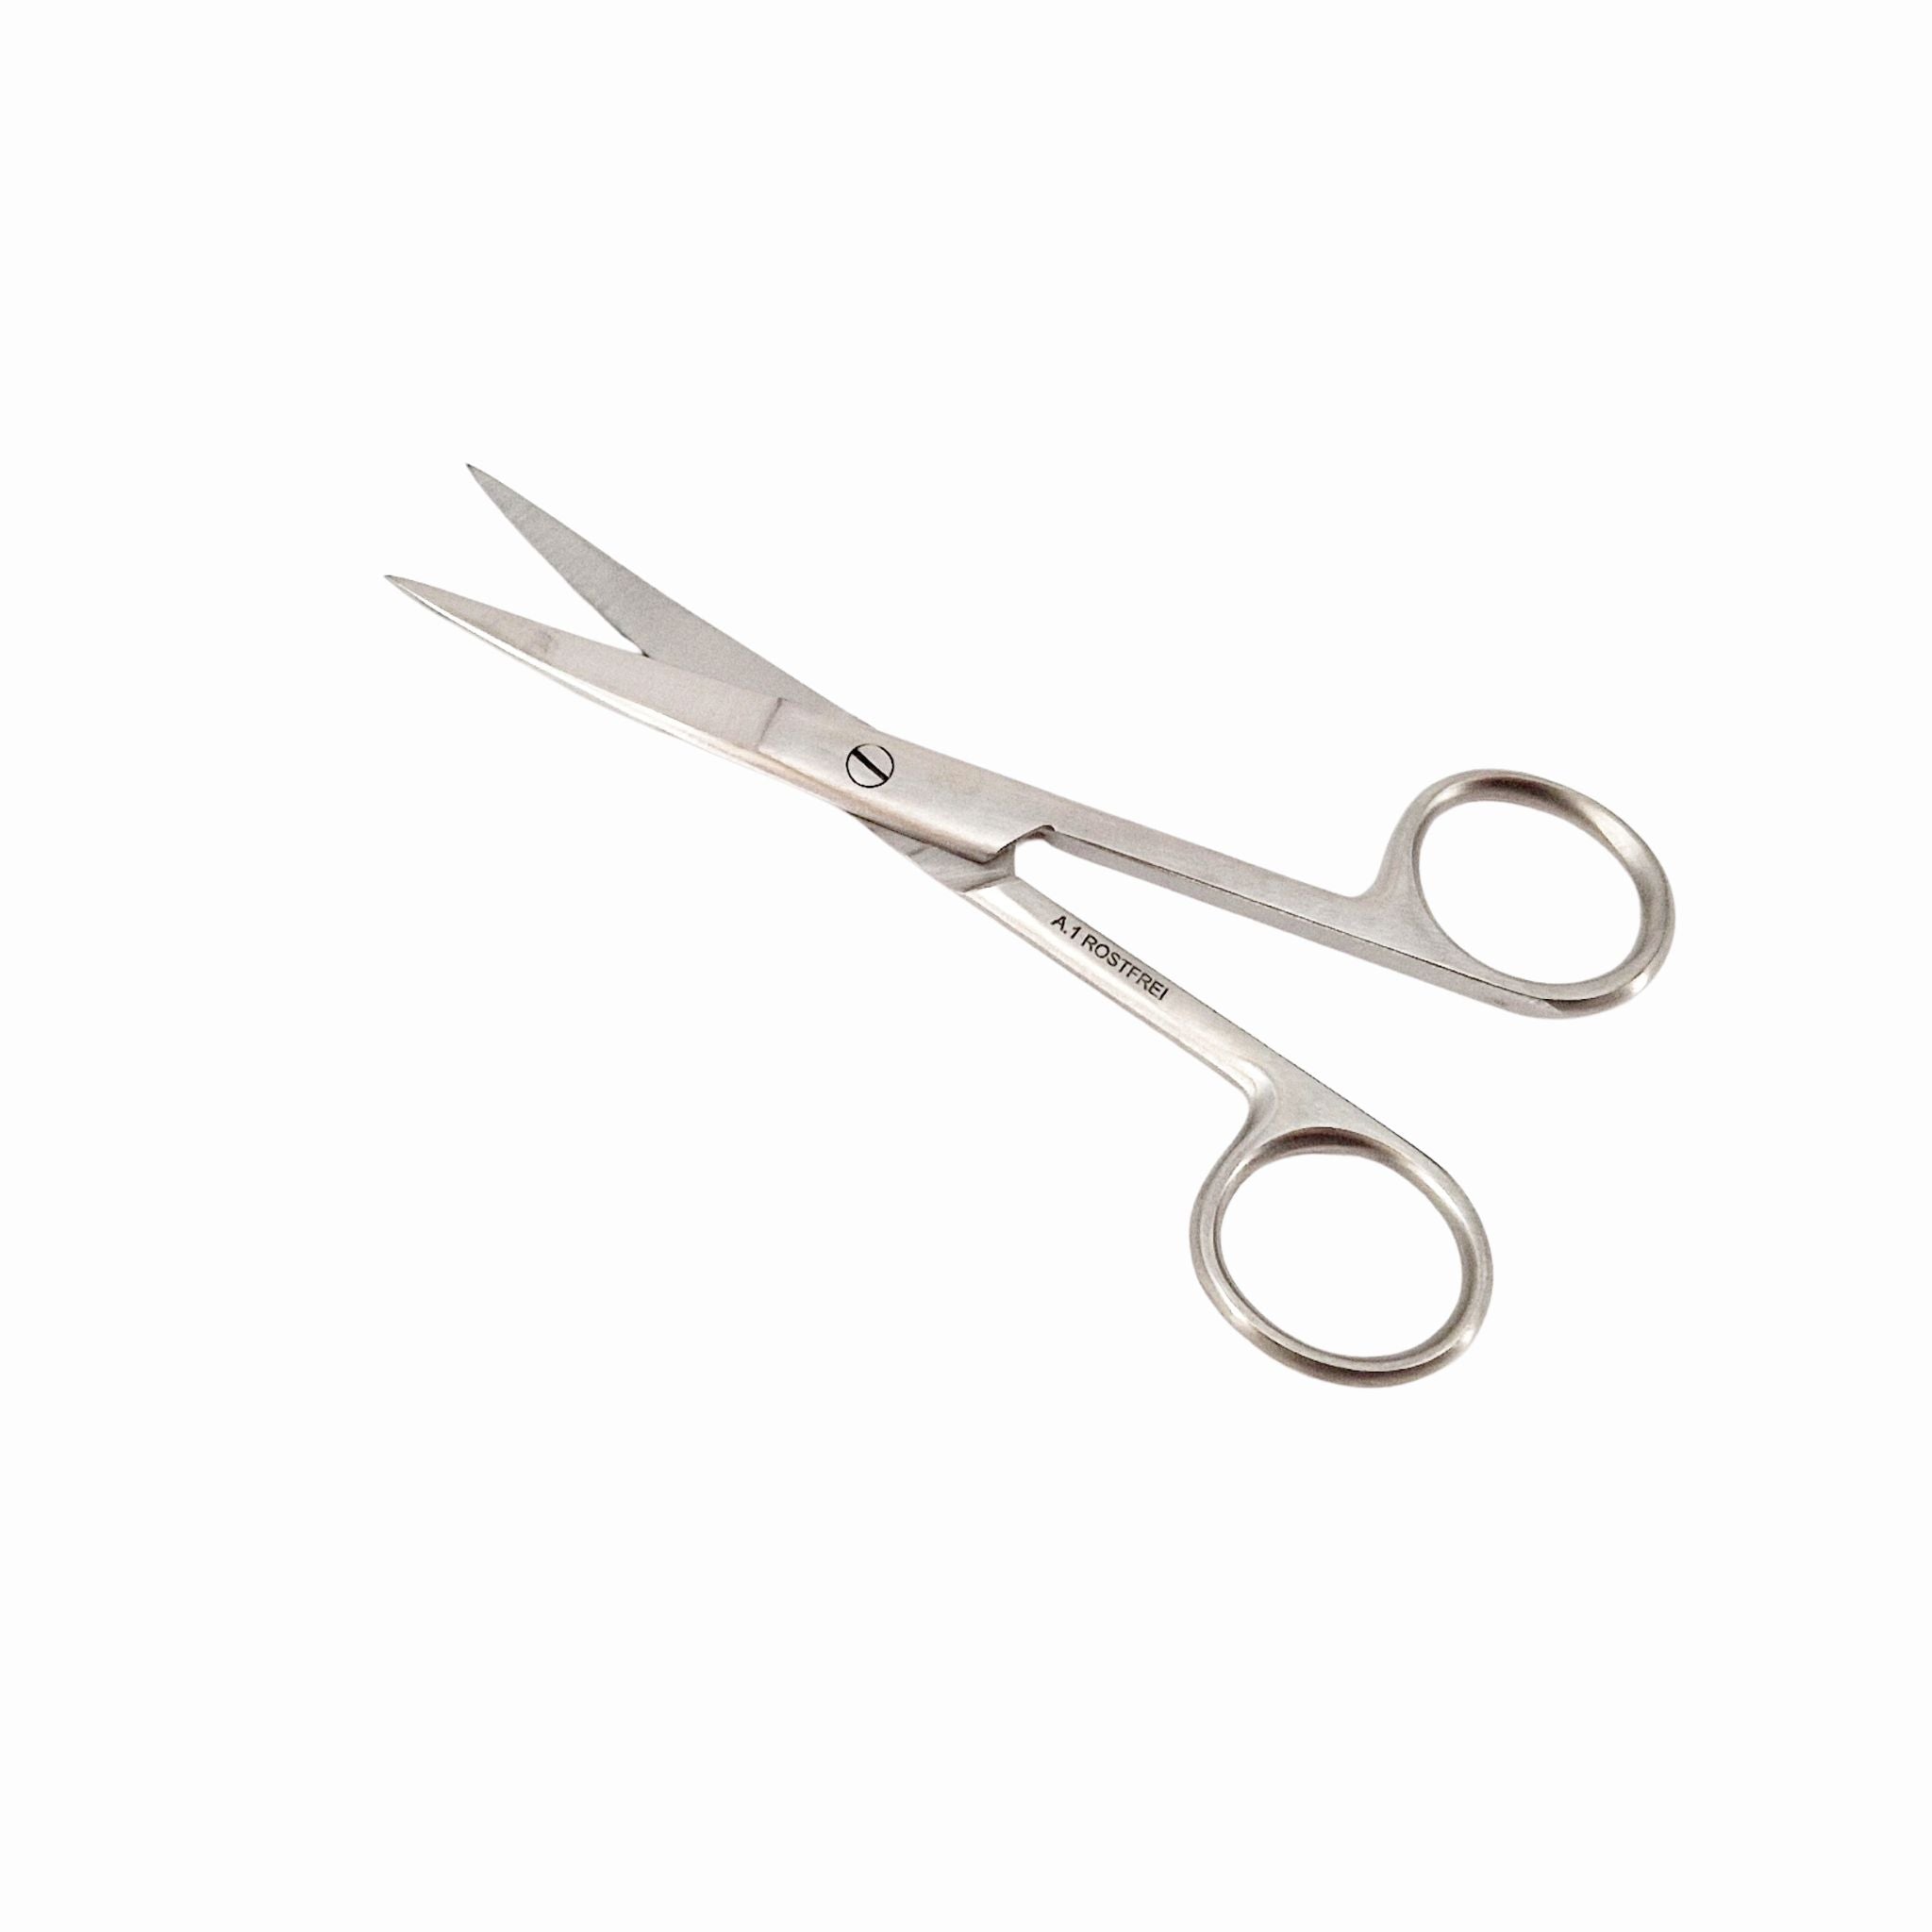 Lavabis scissors curved stainless steel